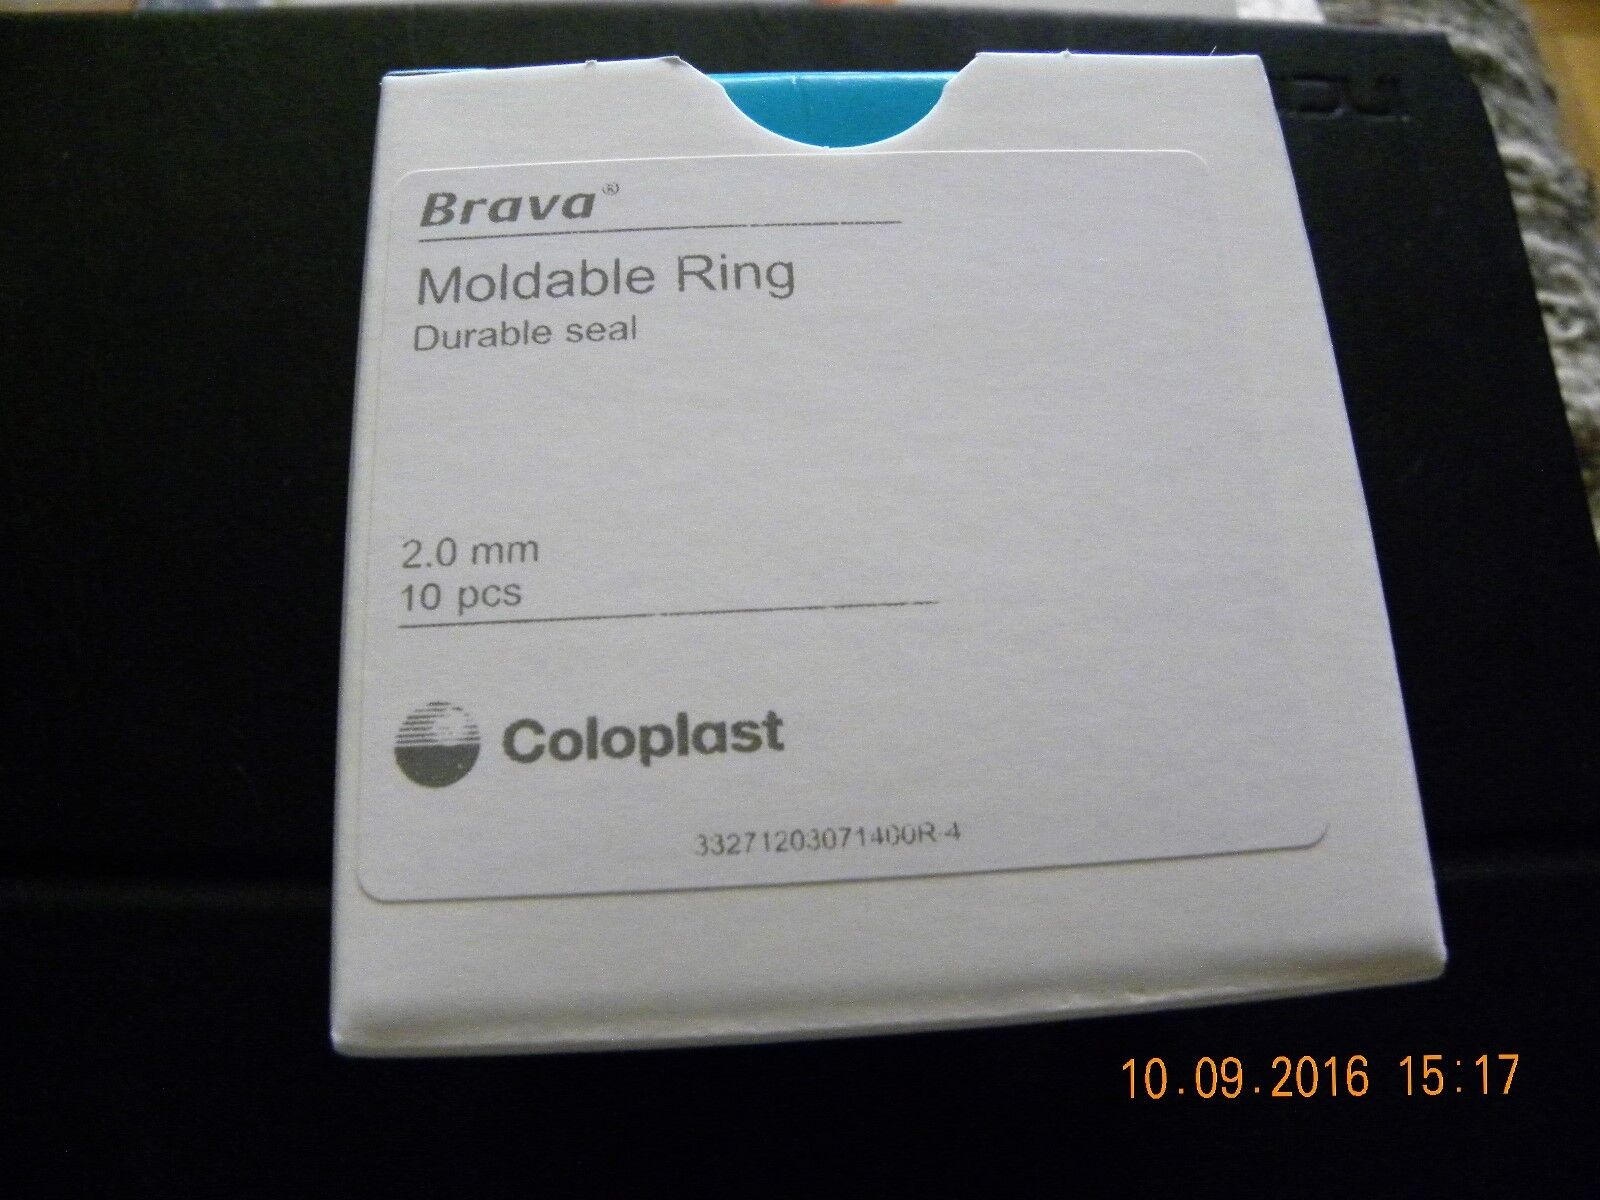 Coloplast #120307 Brava Moldable Rings 2" Size / 2.0mm THIN [Sealed] - Box of 10